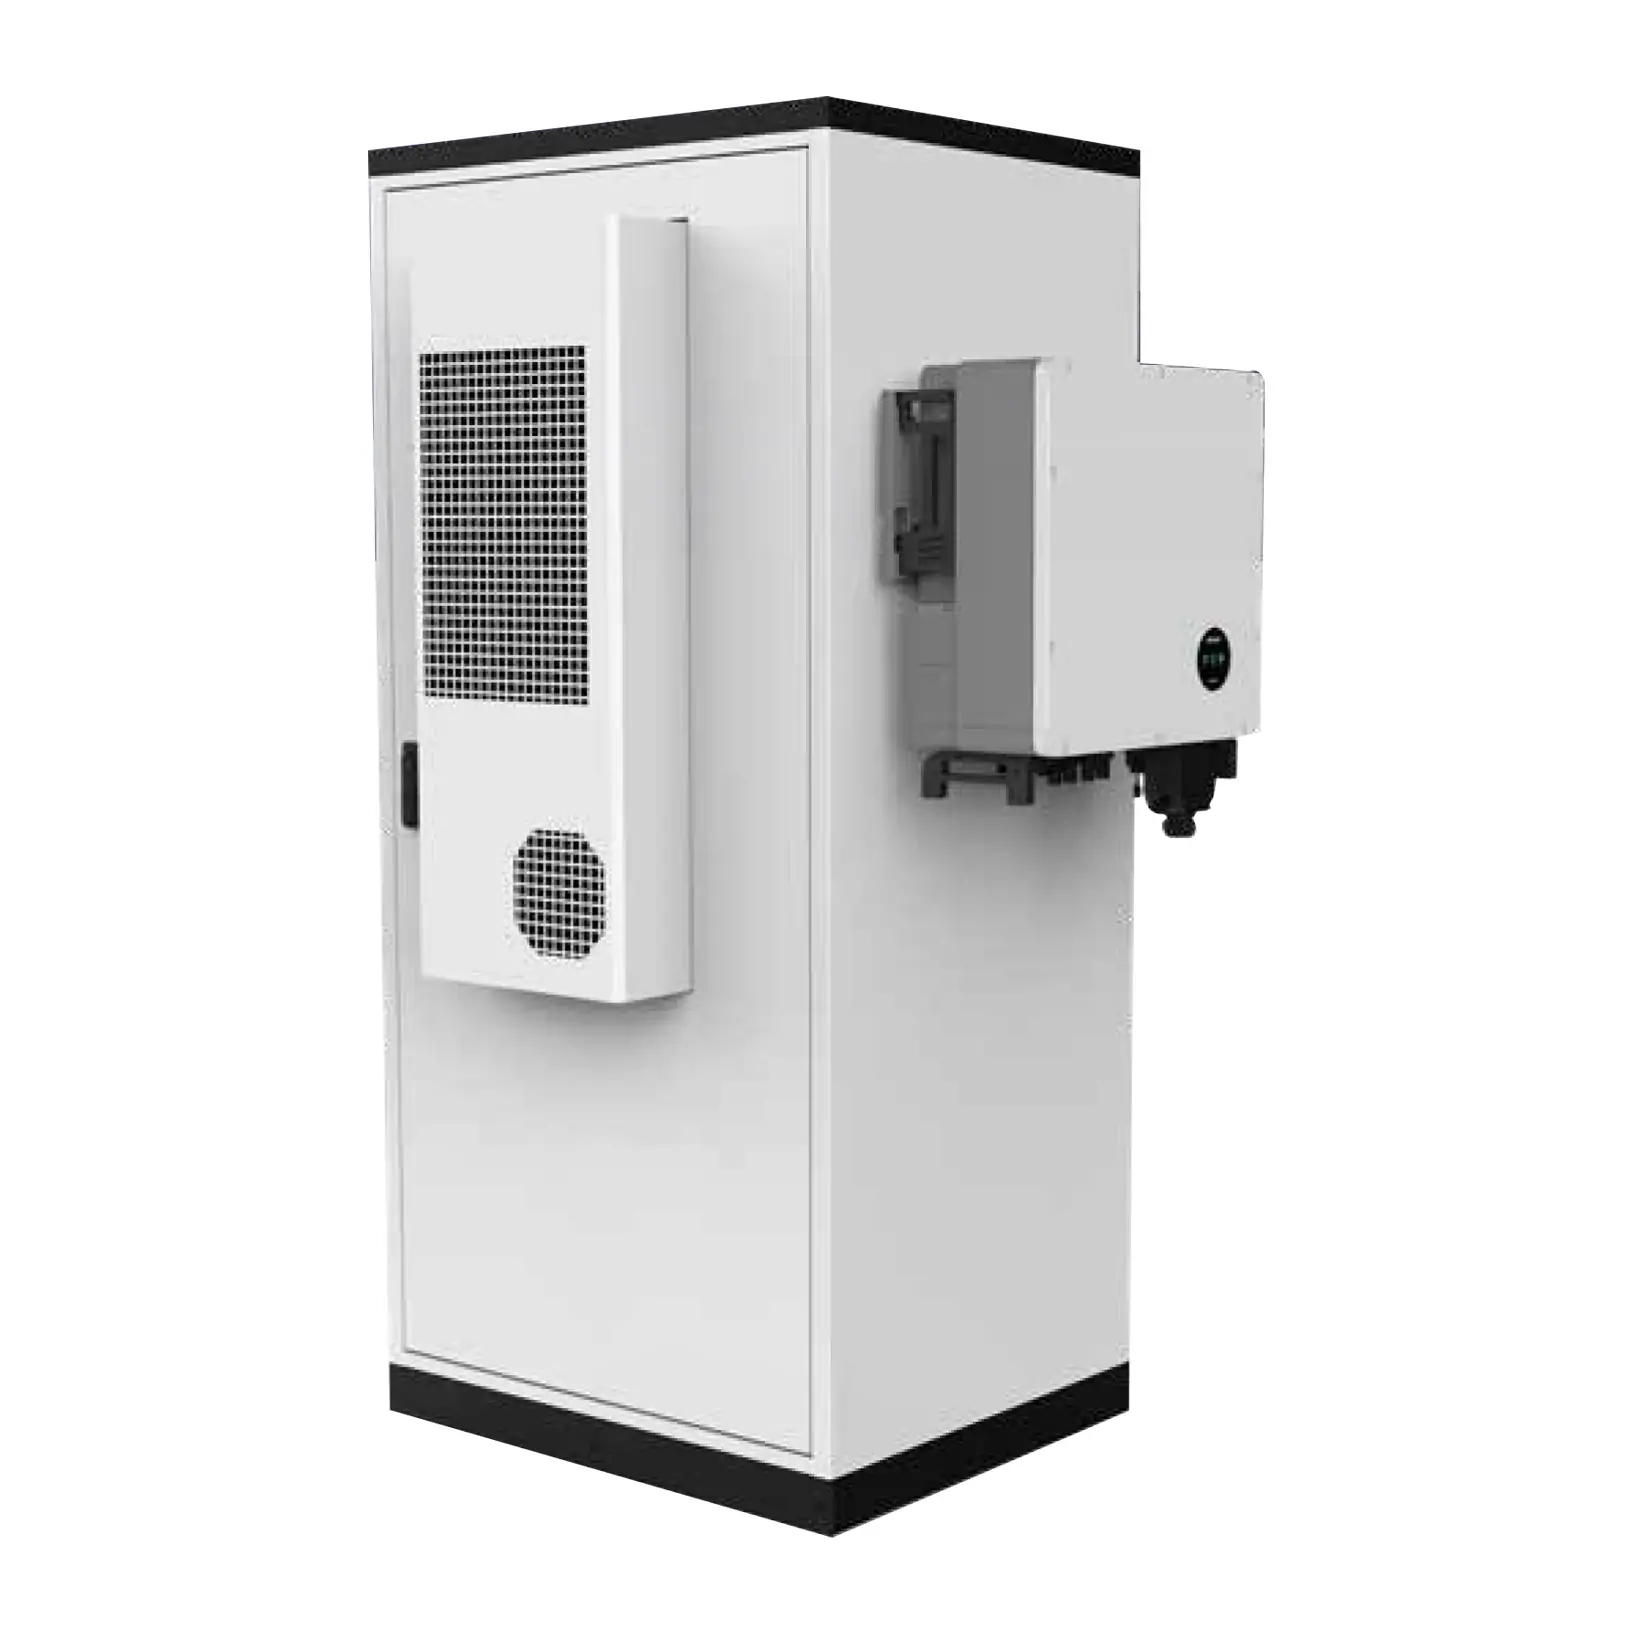 50kW/100kWh outdoor All-in-one Cabinet Energy Storage System